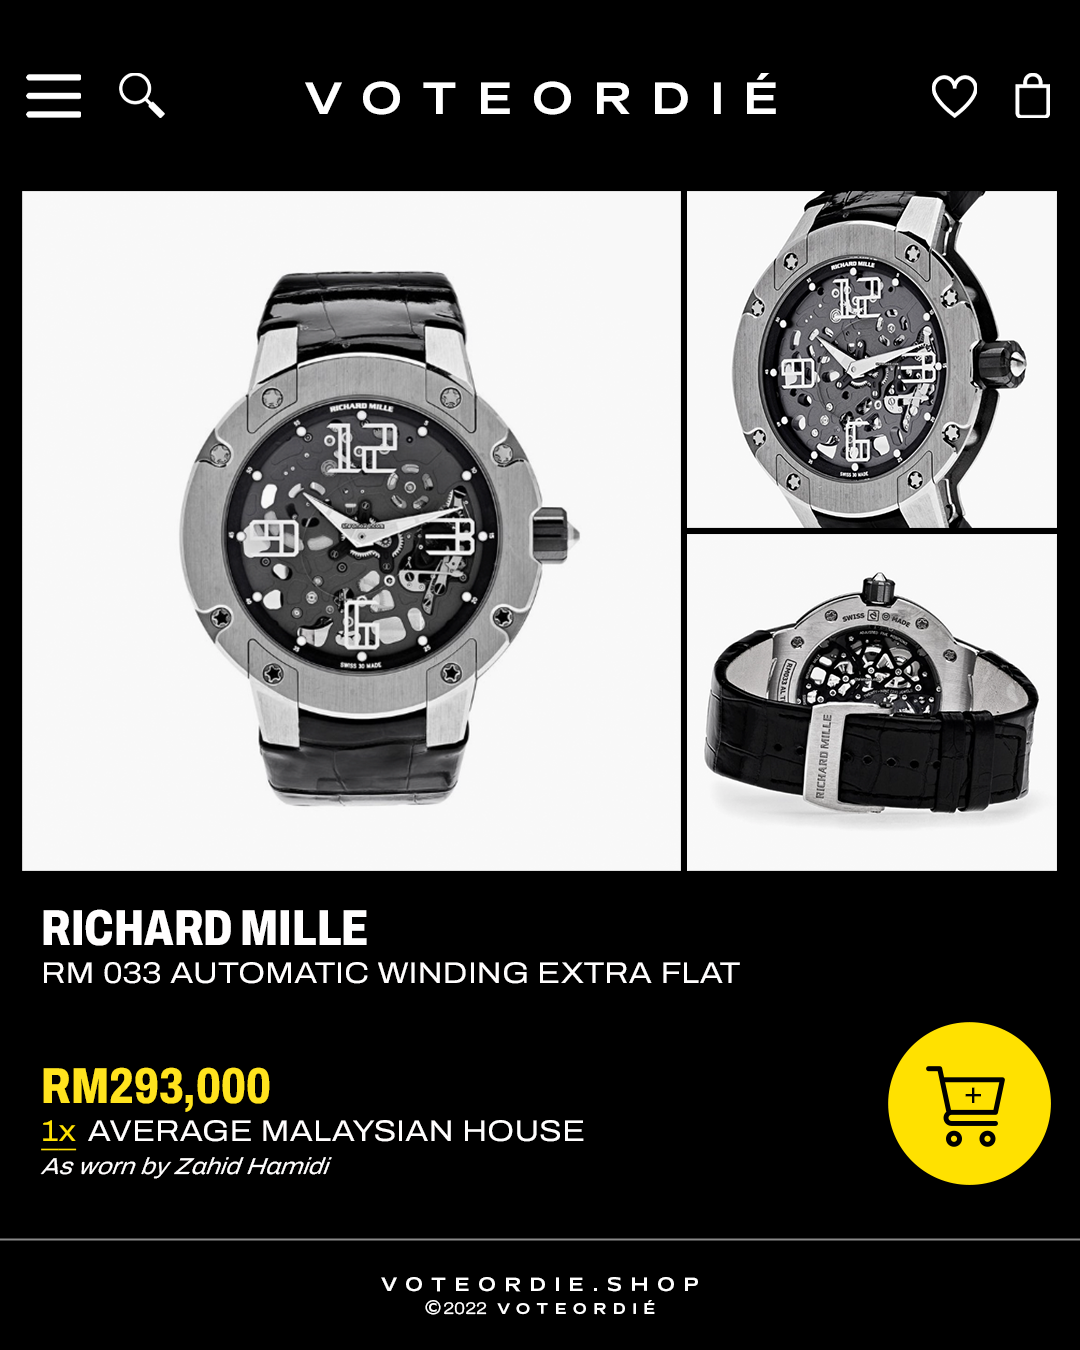 A Richard Mille watch allegedly worn by UMNO president Zahid Hamidi via Voteordié. Image credit: Provided to WauPost